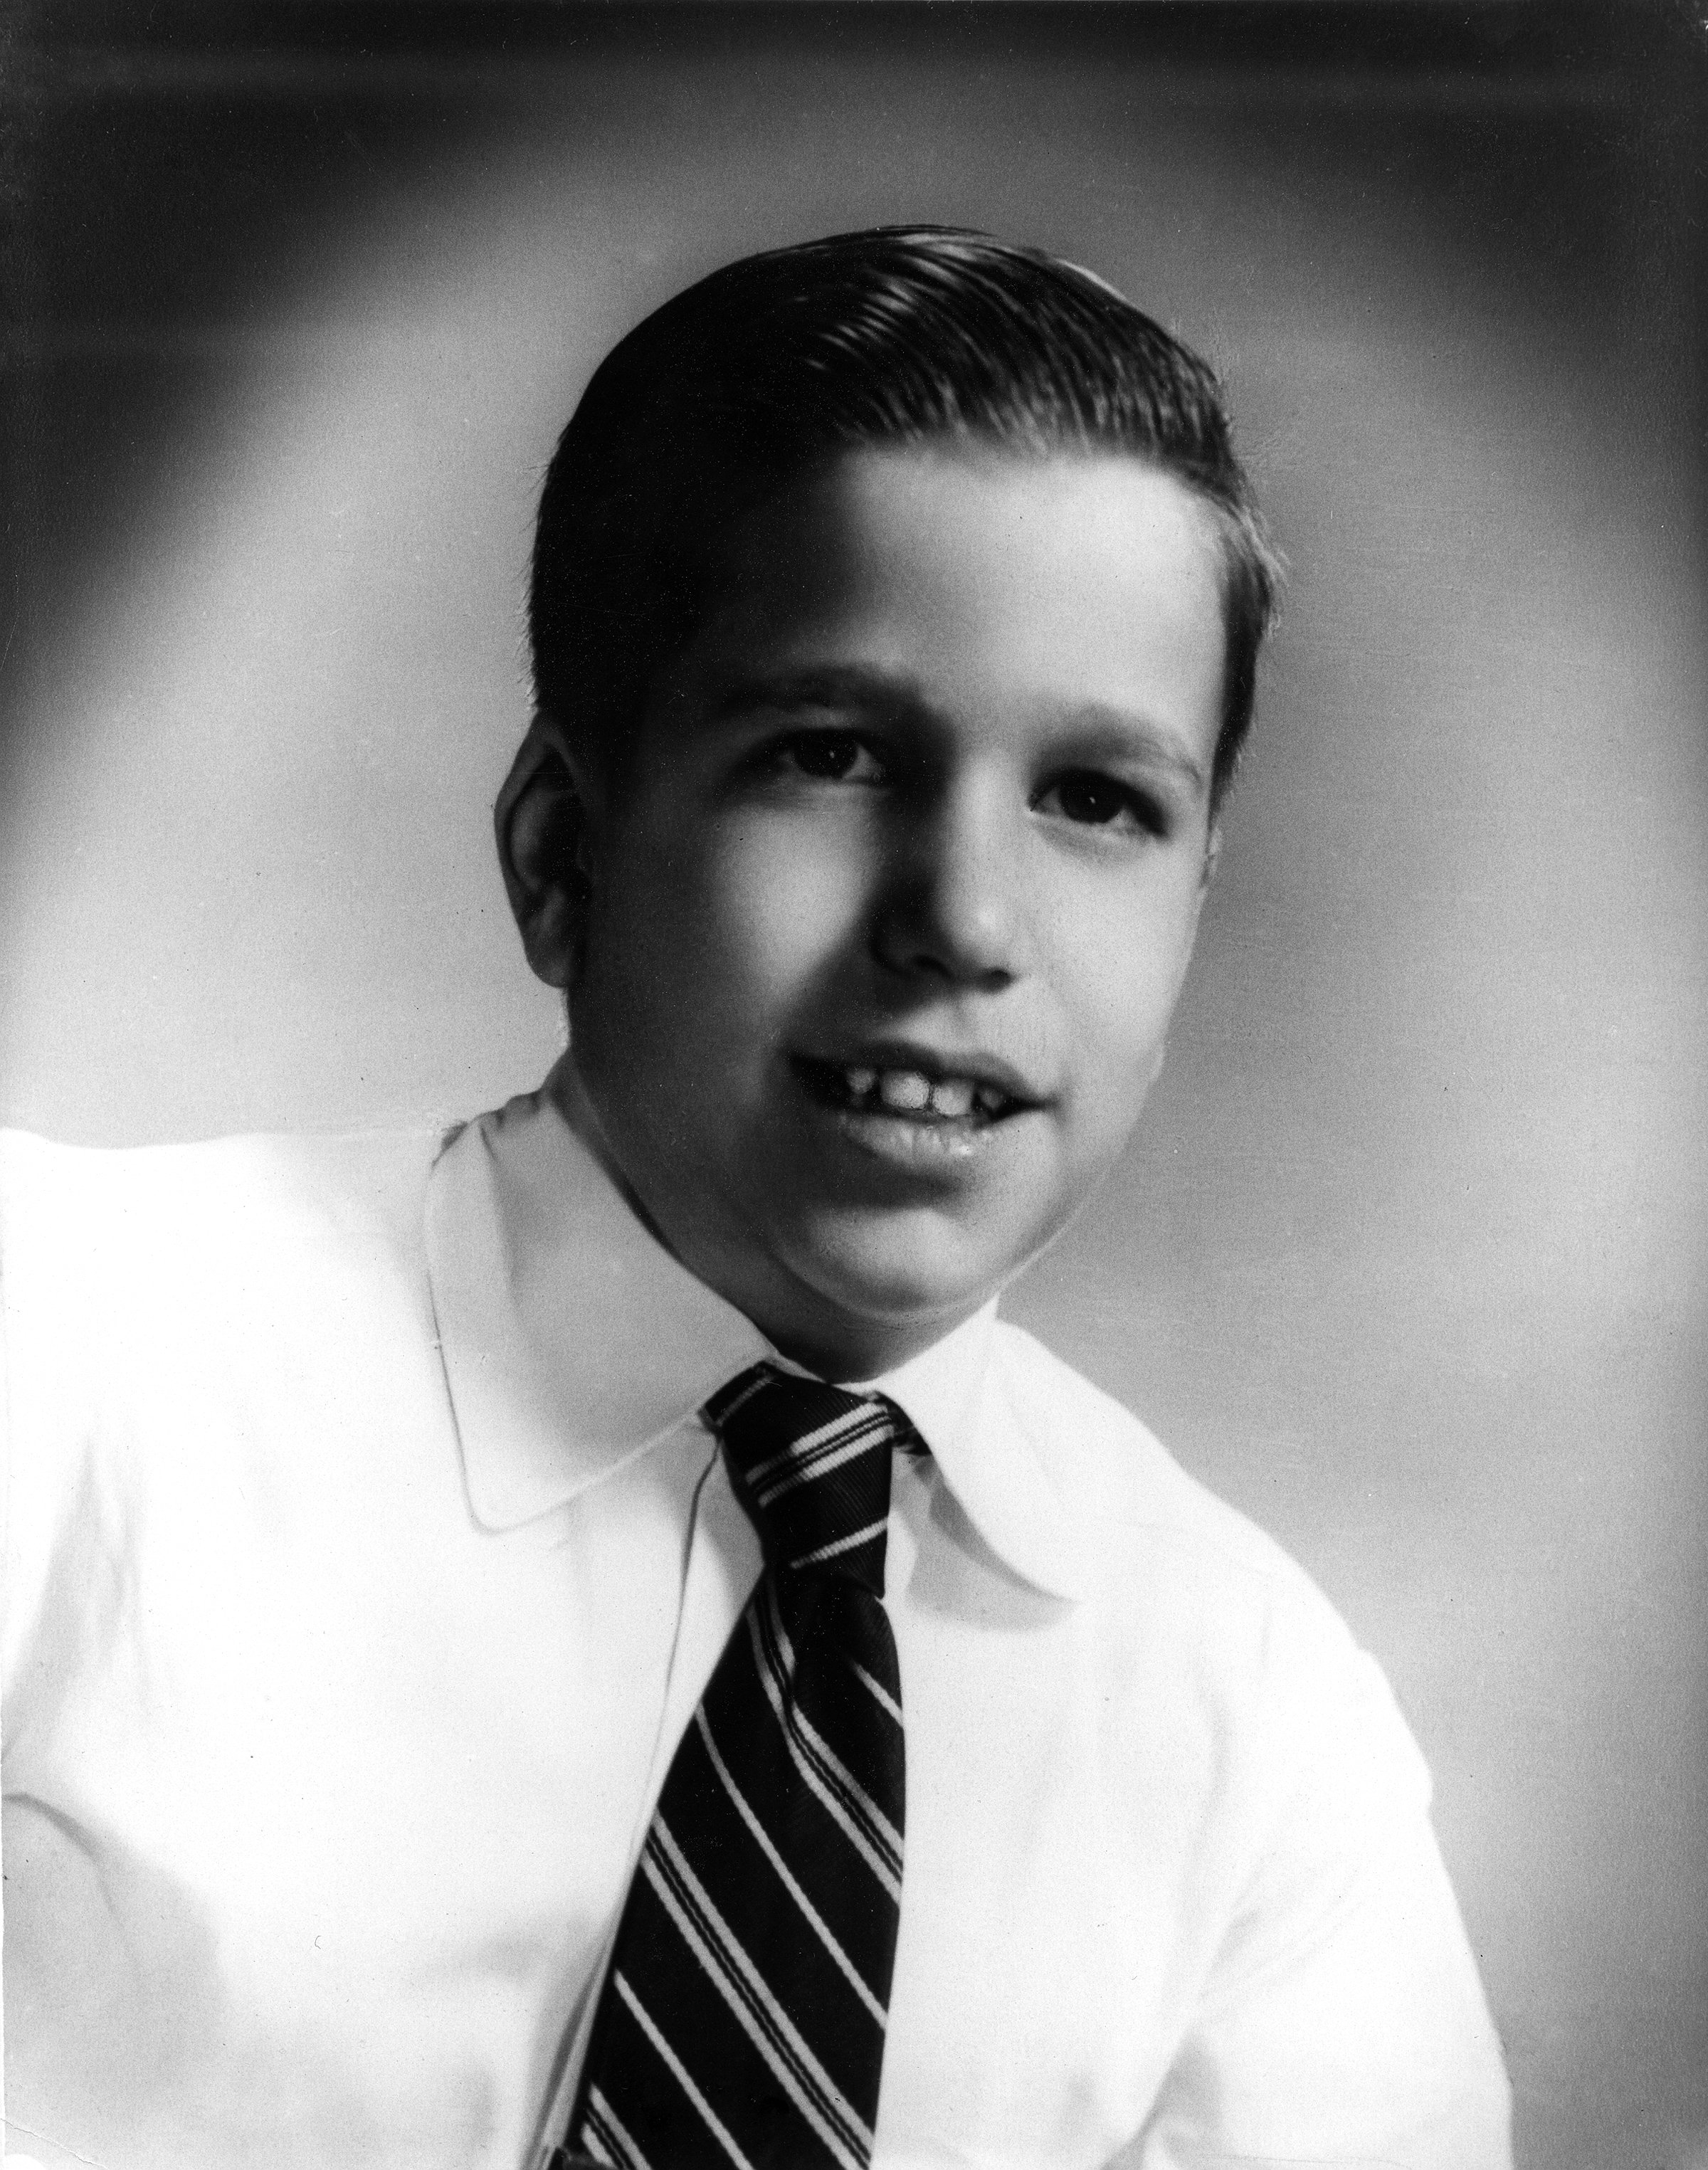 A childhood photograph of Henry Winkler | Source: Getty Images